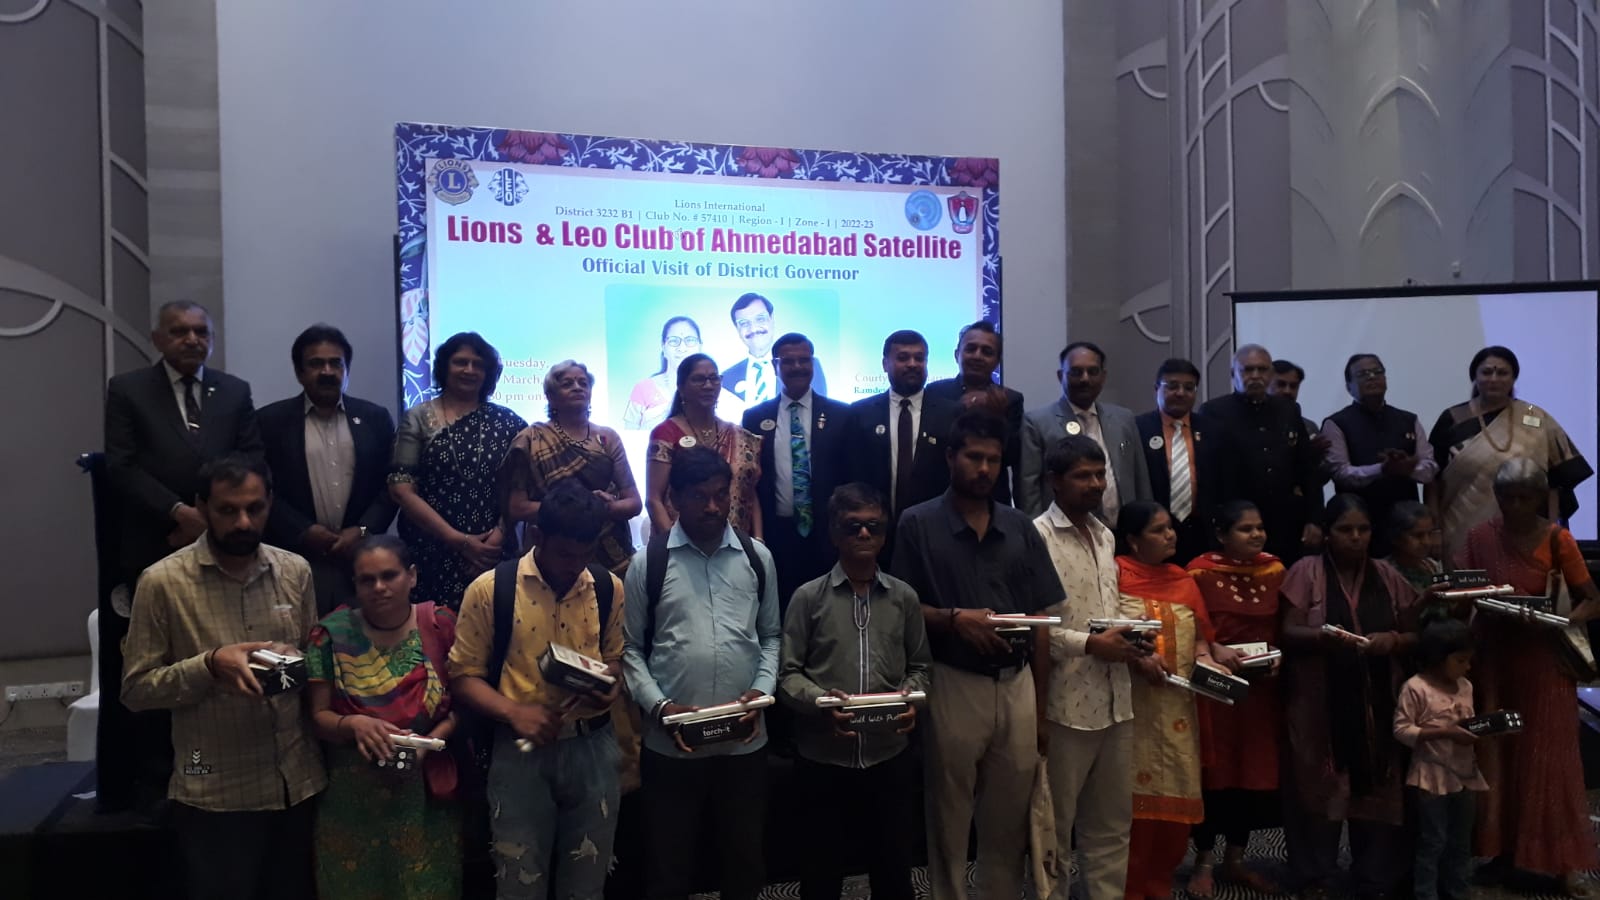 Hearing-aids-distributed-to-needy-children-by-Lions-Club-of-Ahmedabad